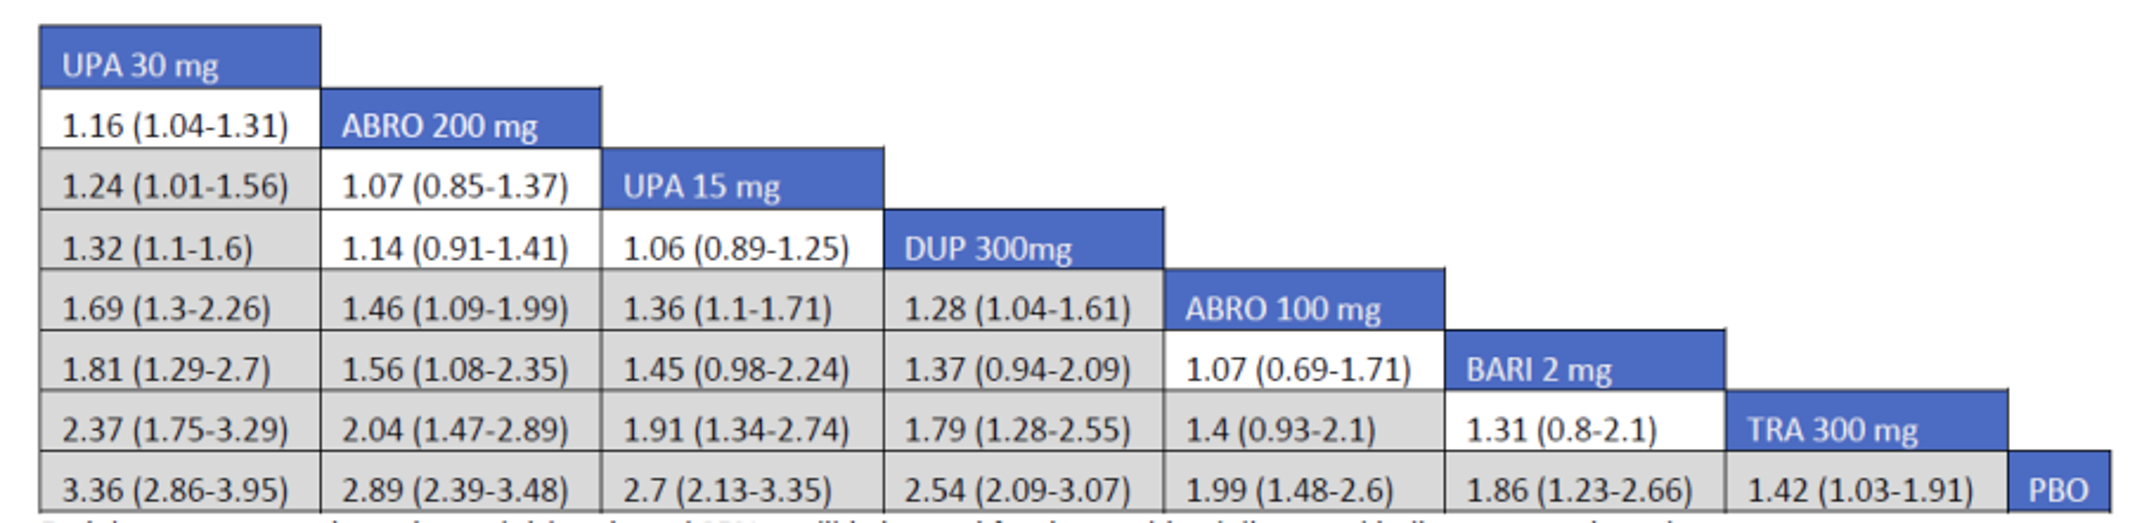 Figure shows the network meta-analysis results for PP-NRS4 in the combination therapy clinical trials conducted in adults with atopic dermatitis.